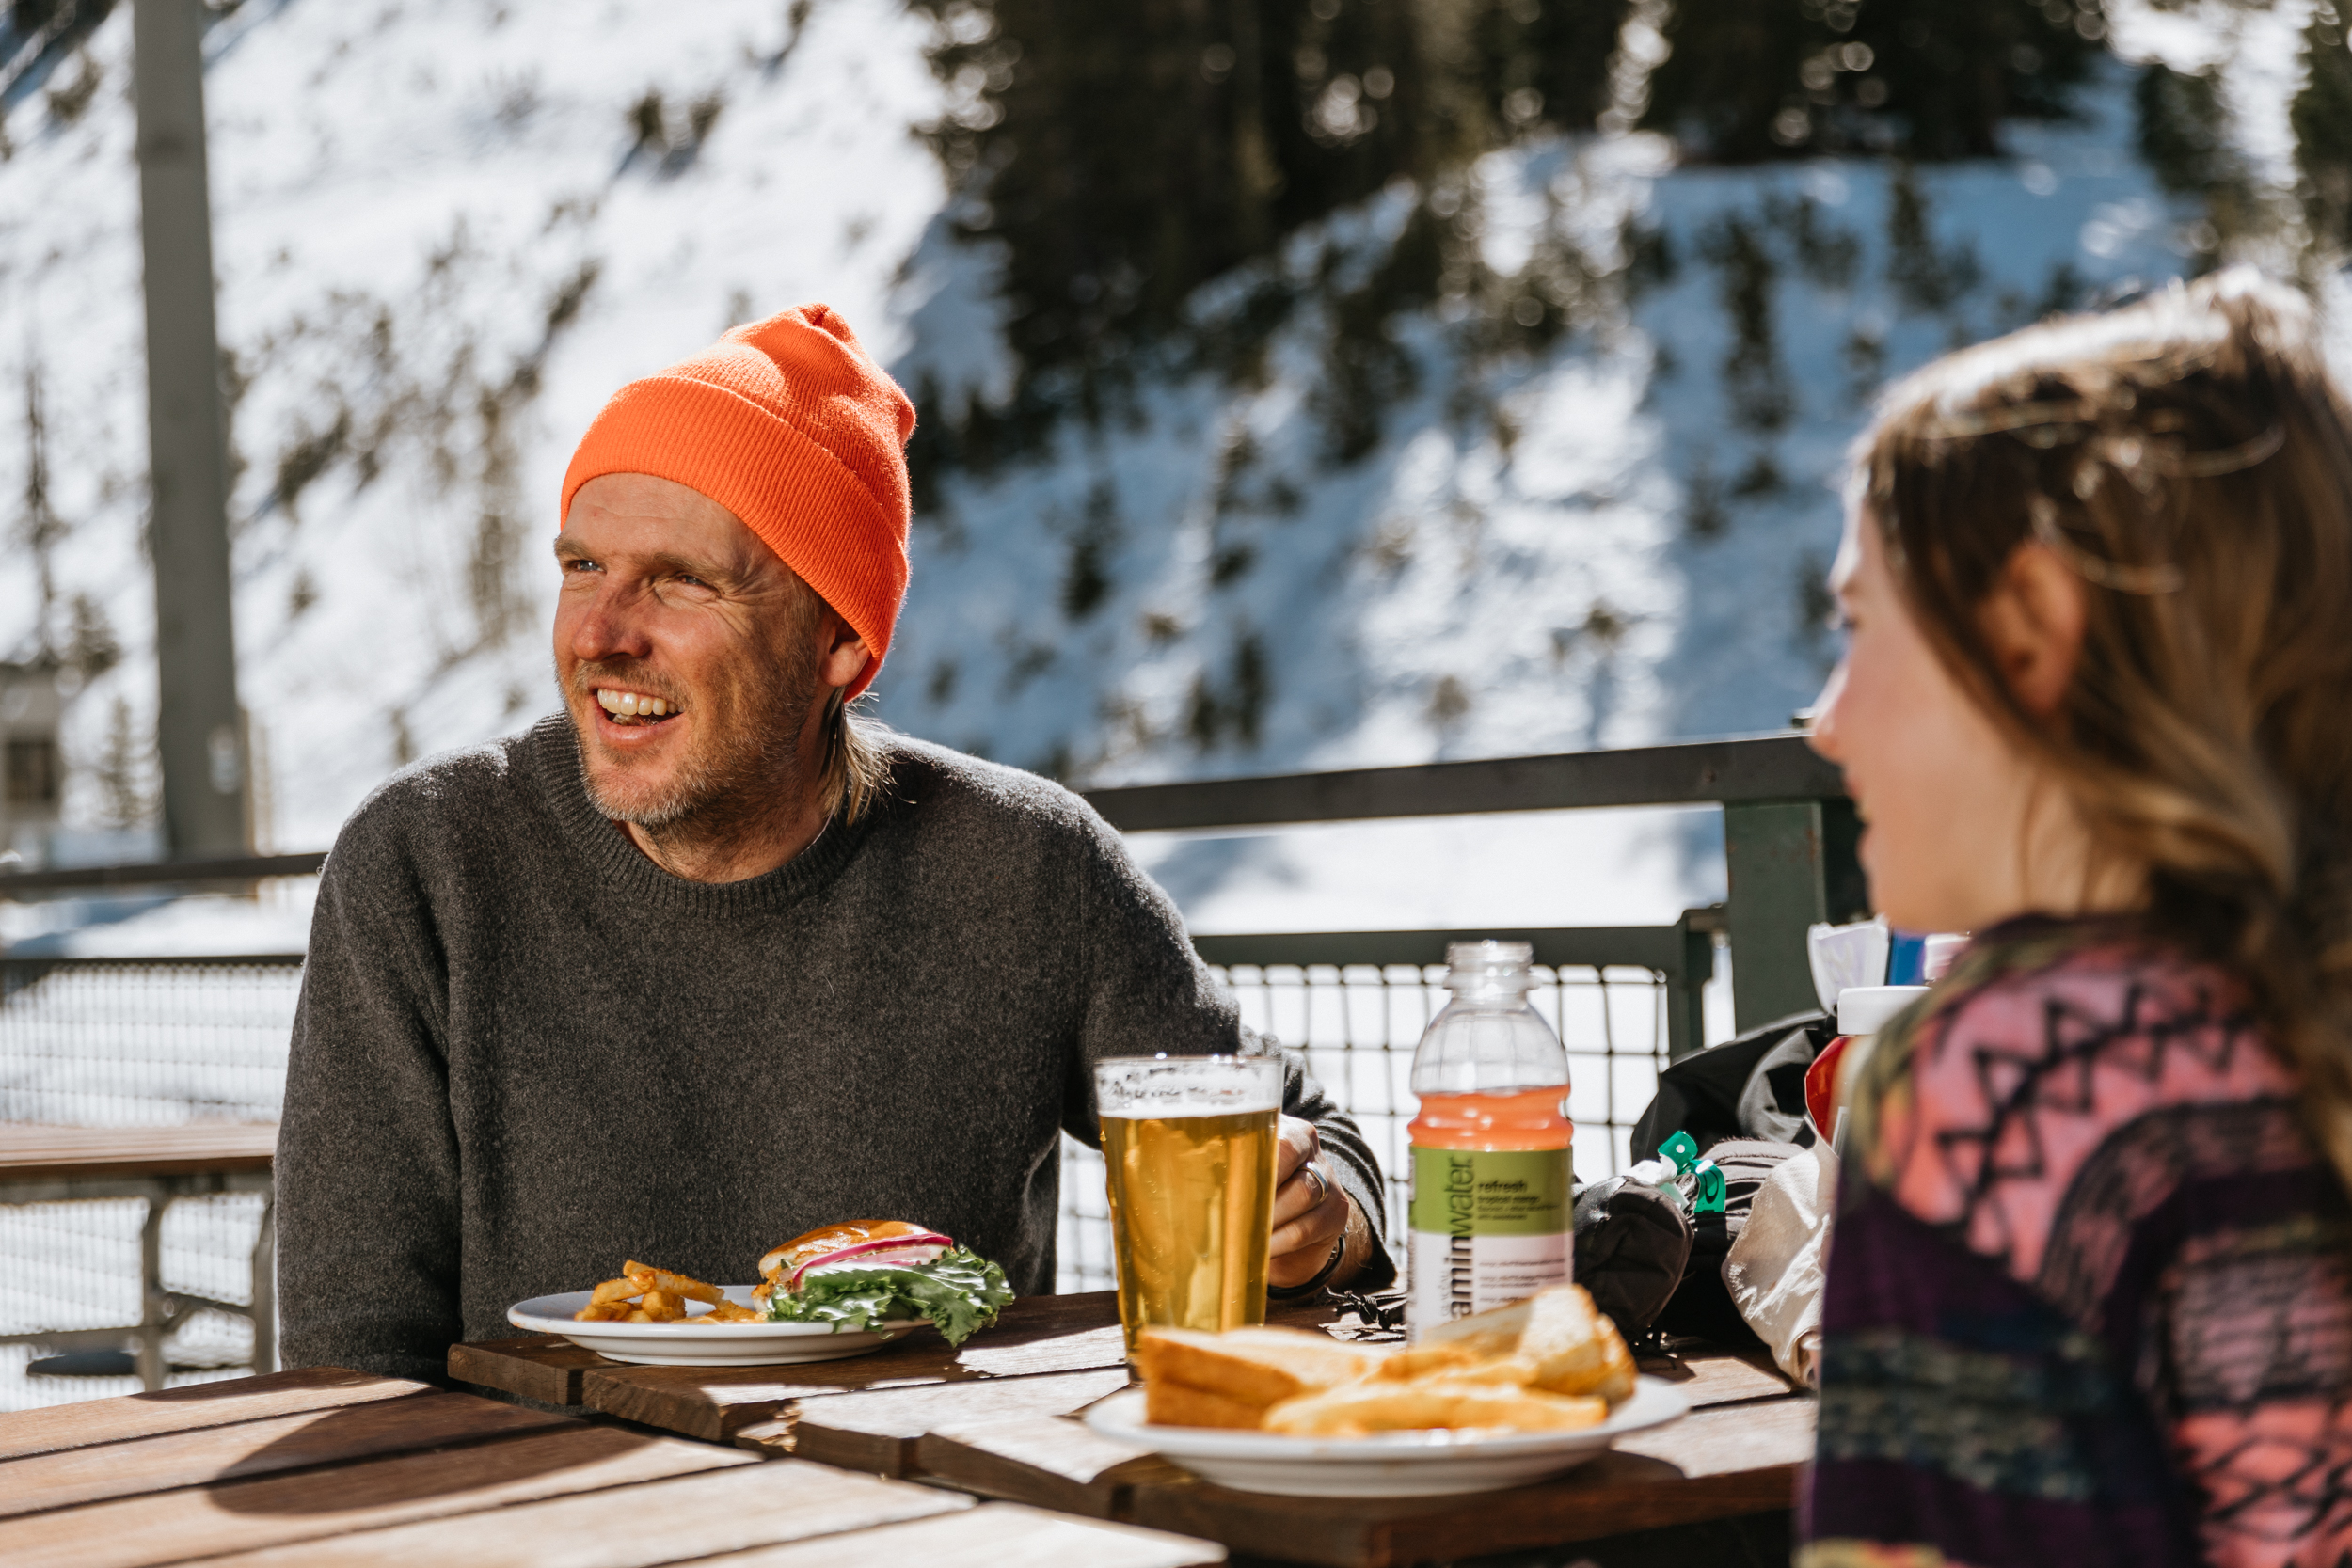 Two people enjoying food outdoors in the snowy mountains